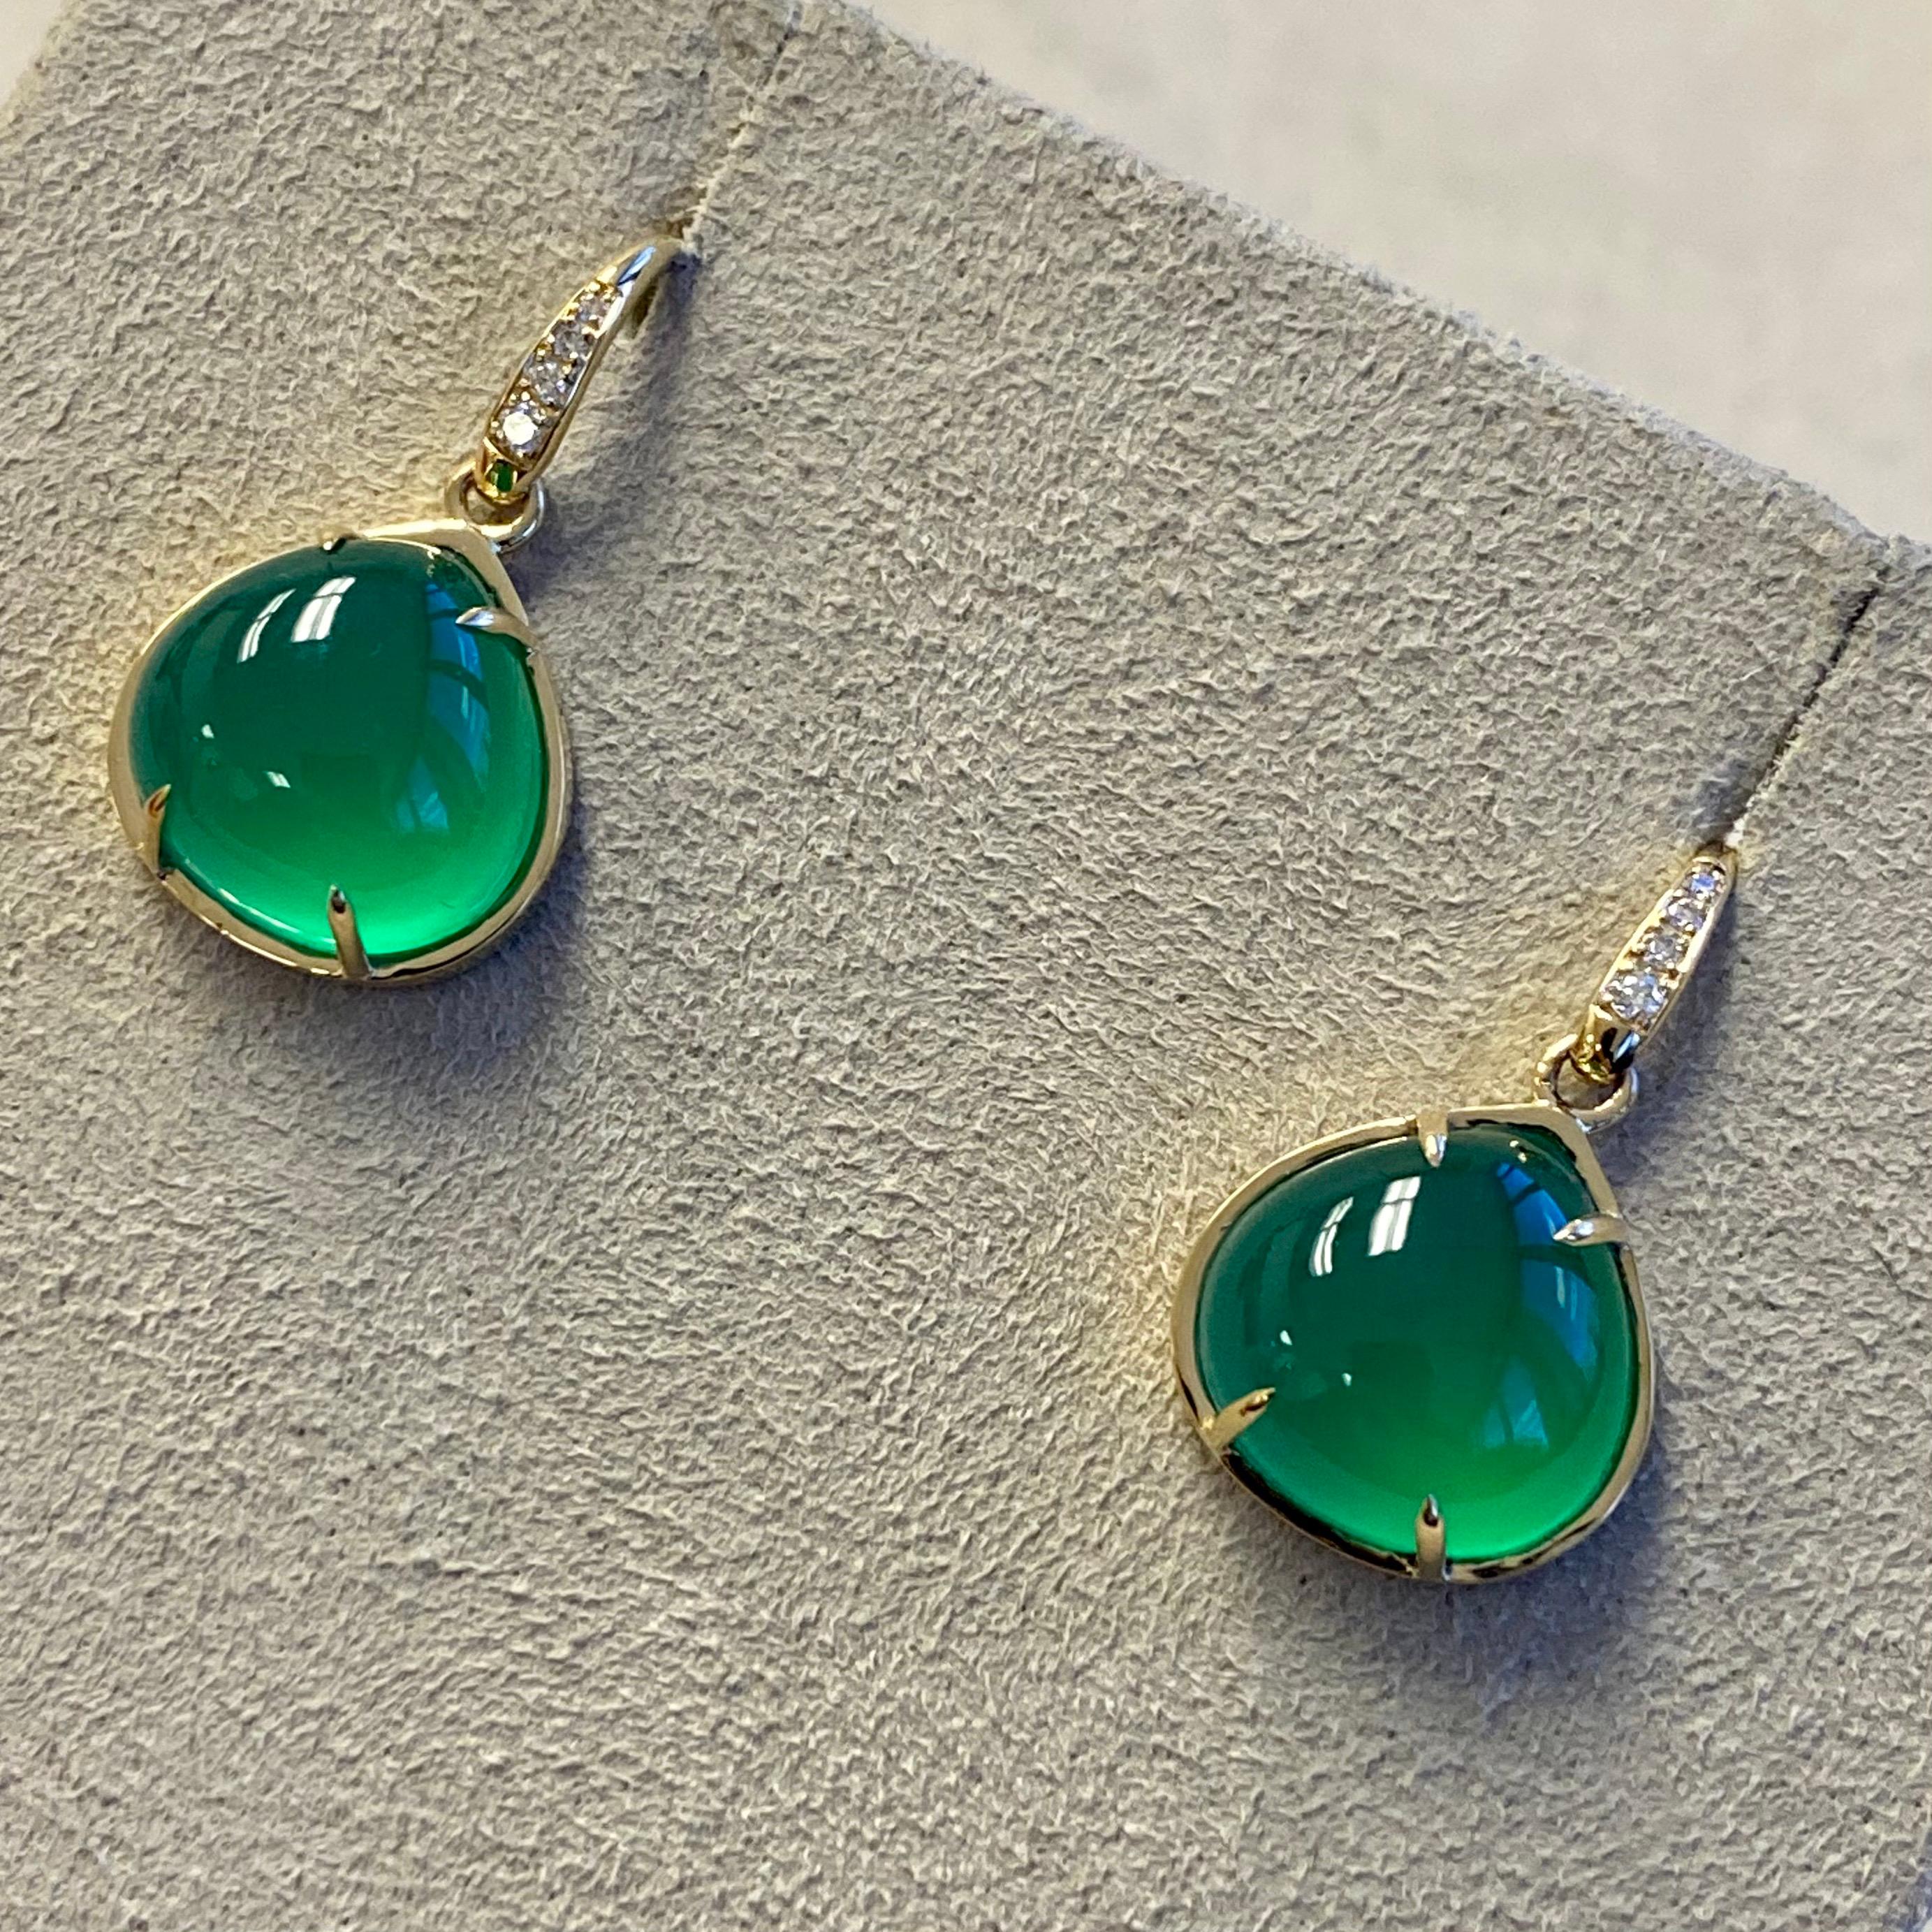 Created in 18kyg
Green chalcedony 11 carats approx.
Champagne Diamonds 0.05 carat approx.
Limited edition


About the Designers ~ Dharmesh & Namrata

Drawing inspiration from little things, Dharmesh & Namrata Kothari have created an extraordinary